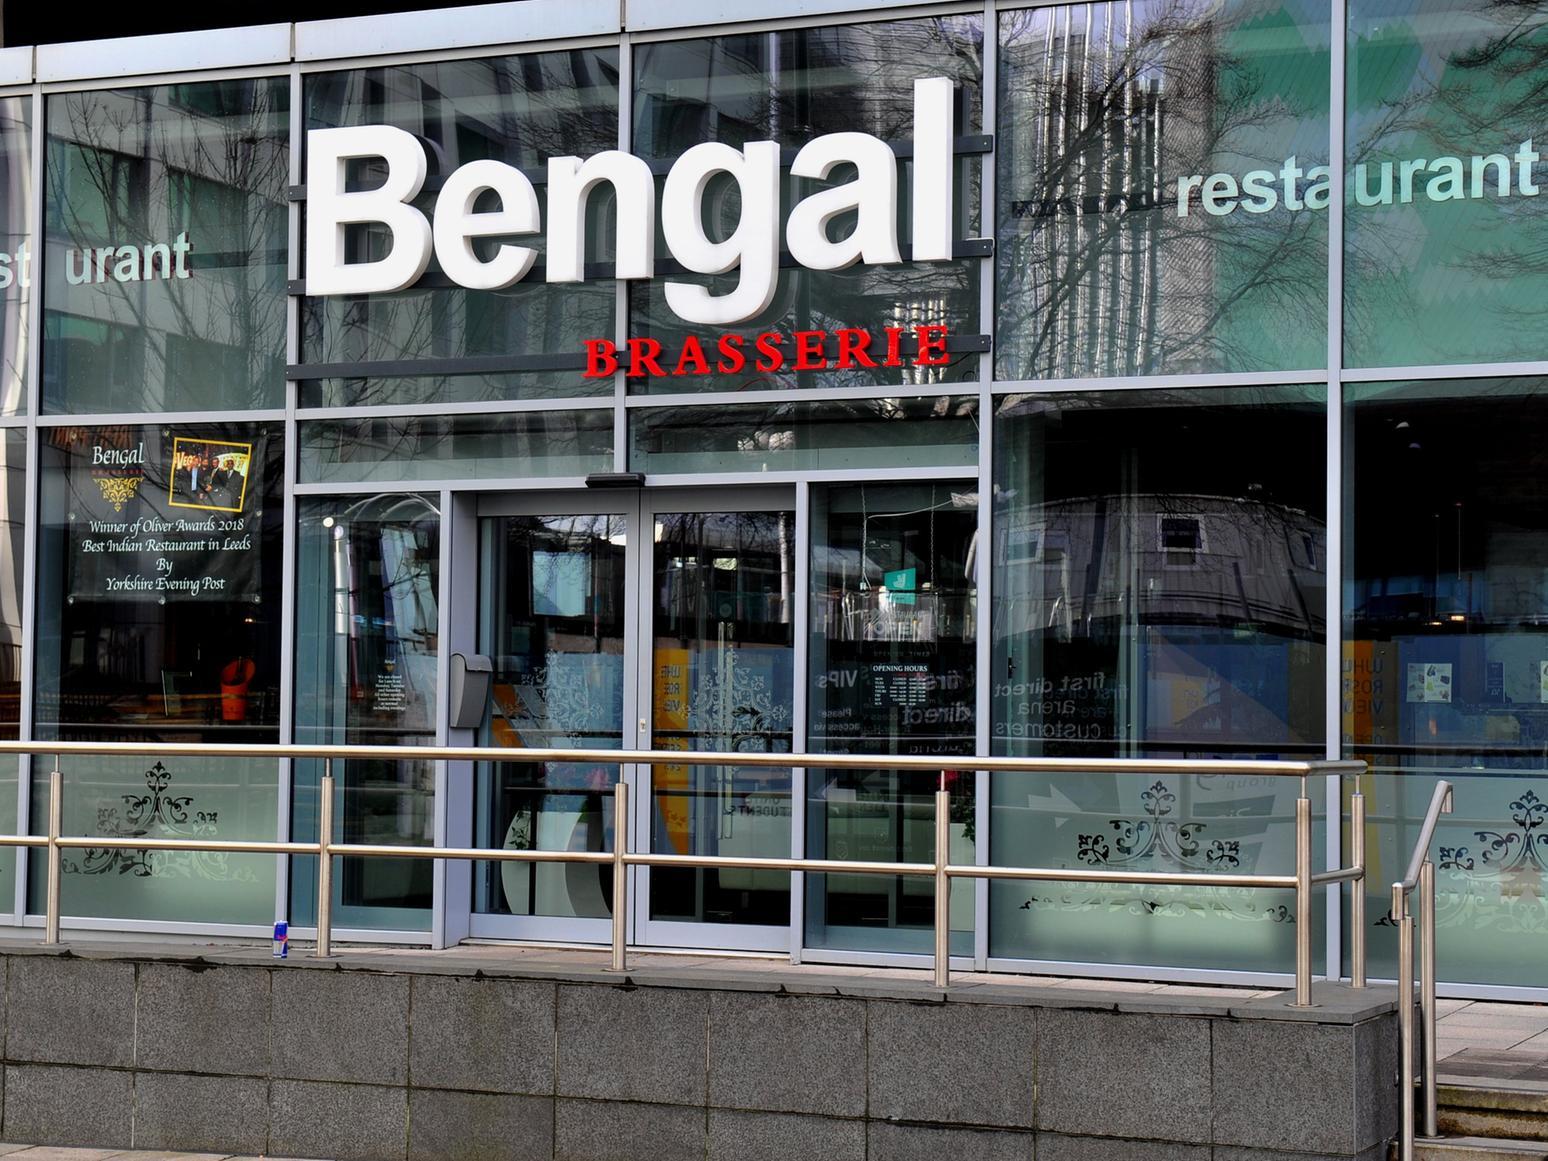 Bengal Brasserie's three Leeds restaurants all took a top 5 spot and reviews praised the chain's excellent service, delicious curries and relaxed atmosphere. Located on Merrion Way, Roundhay Road and Haddon Road.